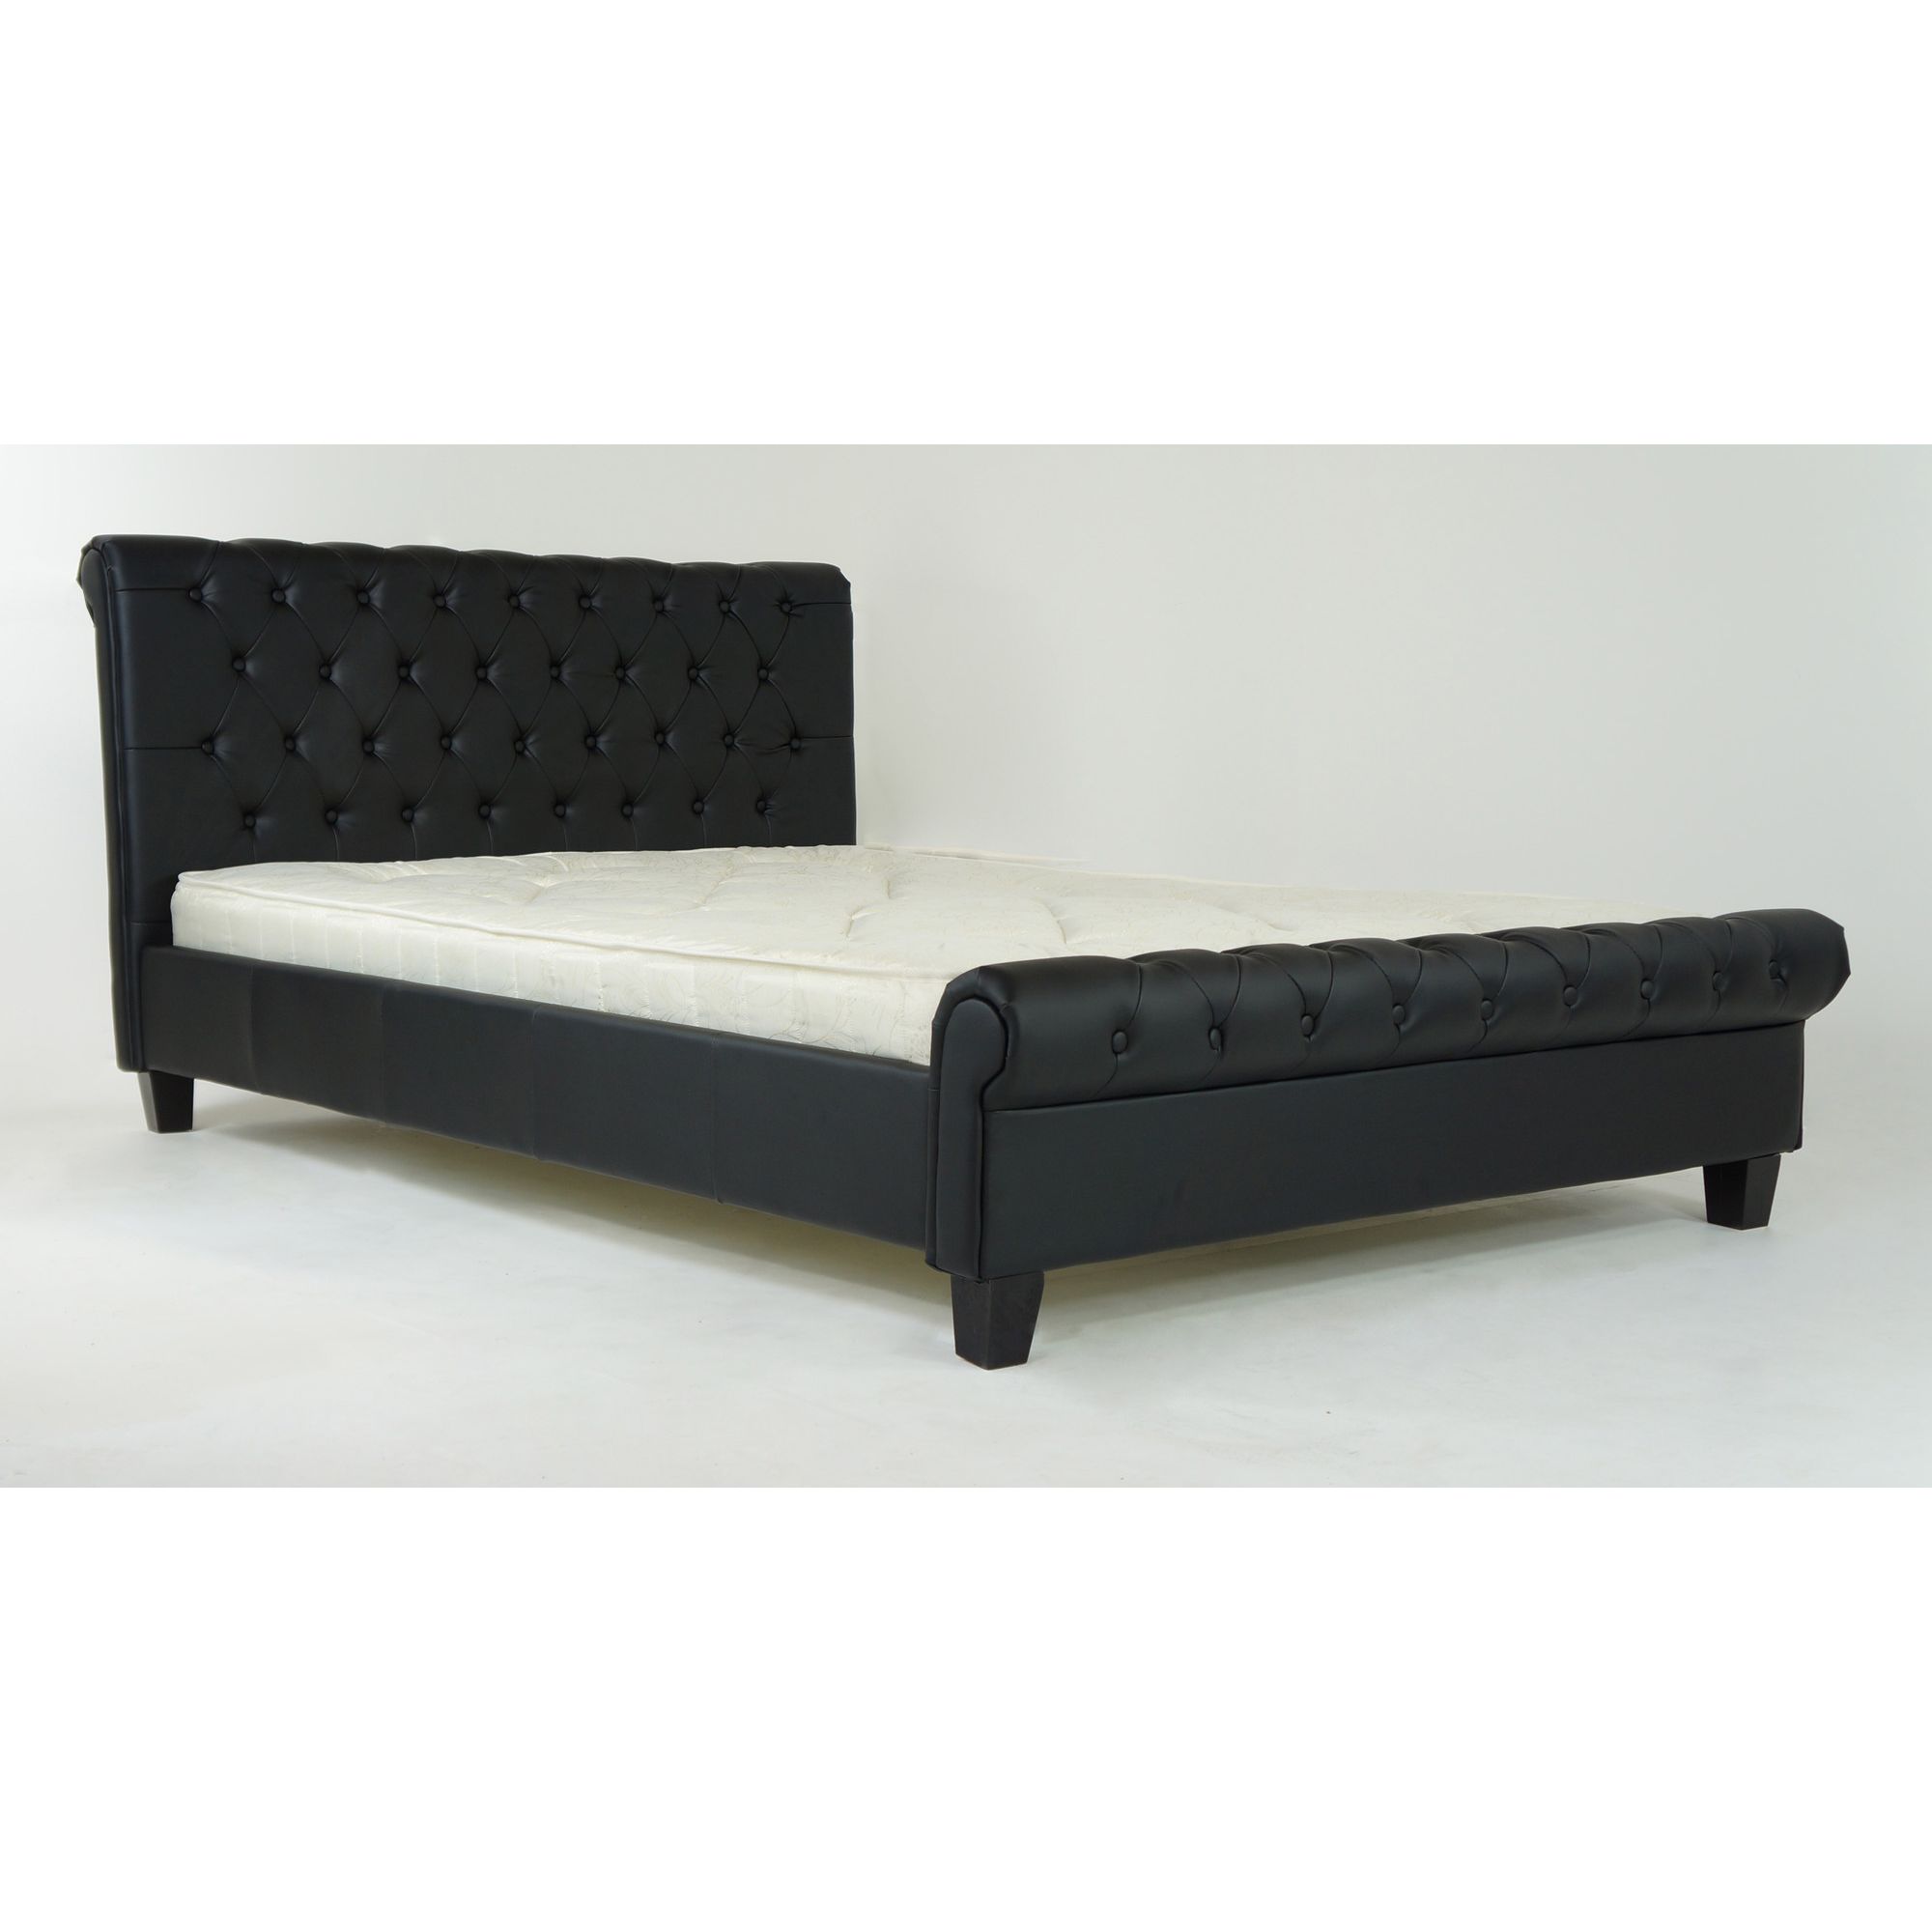 Alpha furniture Chesterfield Bed - Black - King - Drawers at Tesco Direct